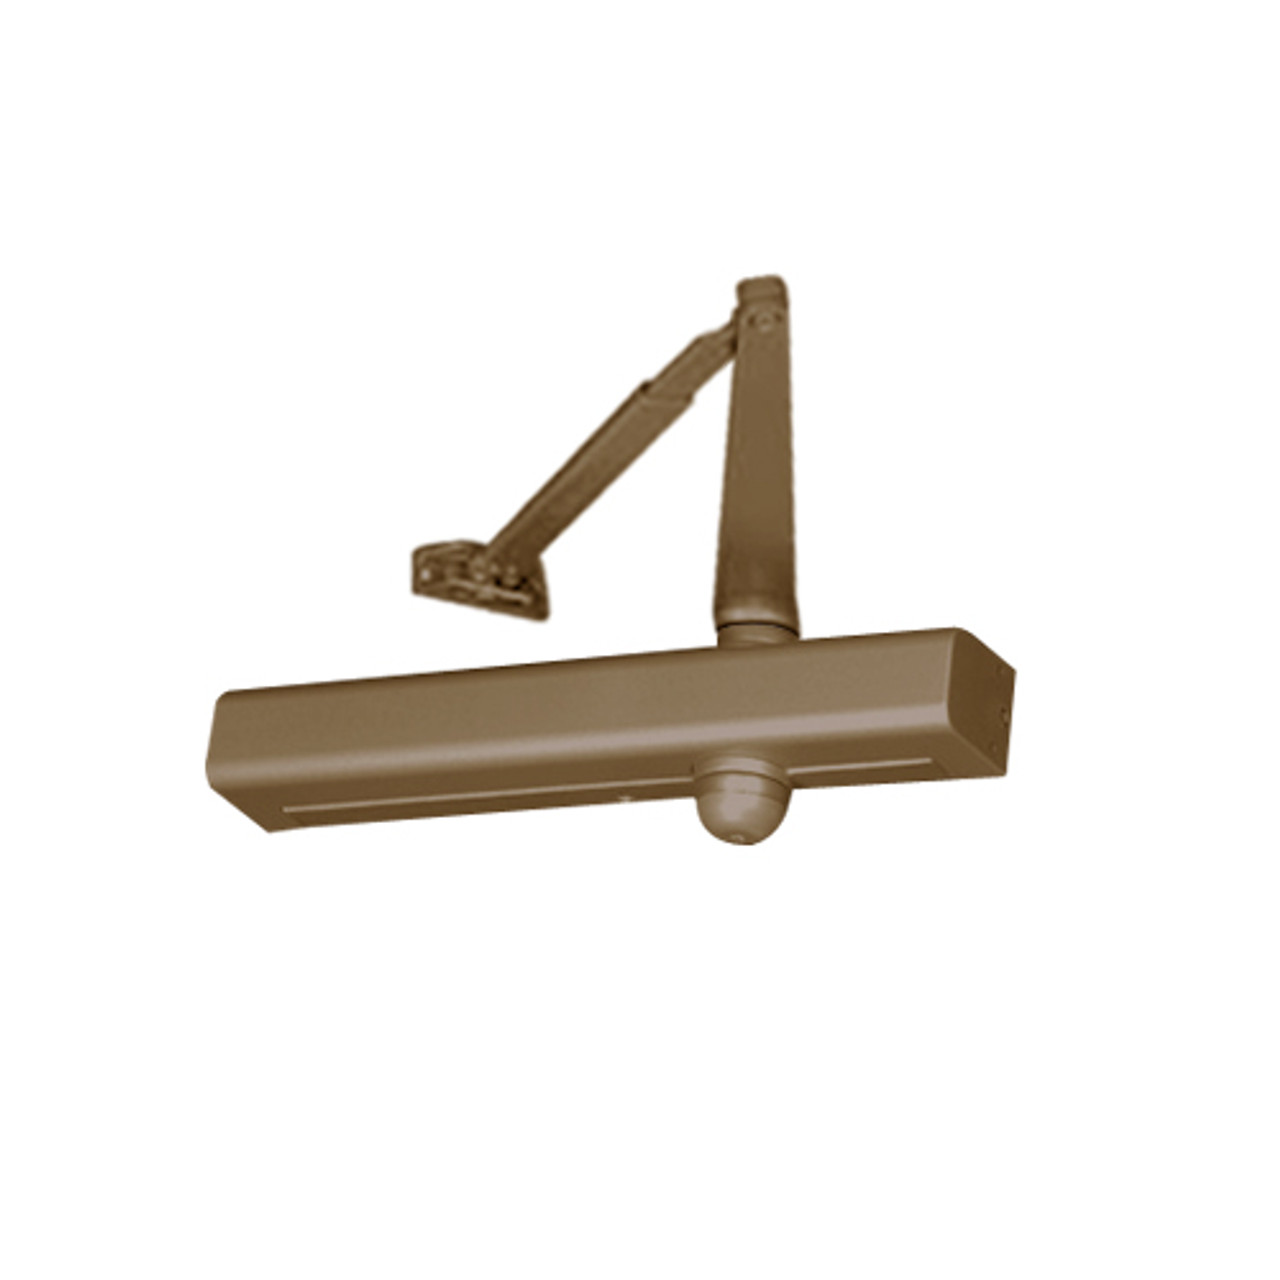 8381-691 Norton 8000 Series Non-Hold Open Door Closers with Regular Low Profile Arm in Dull Bronze Finish